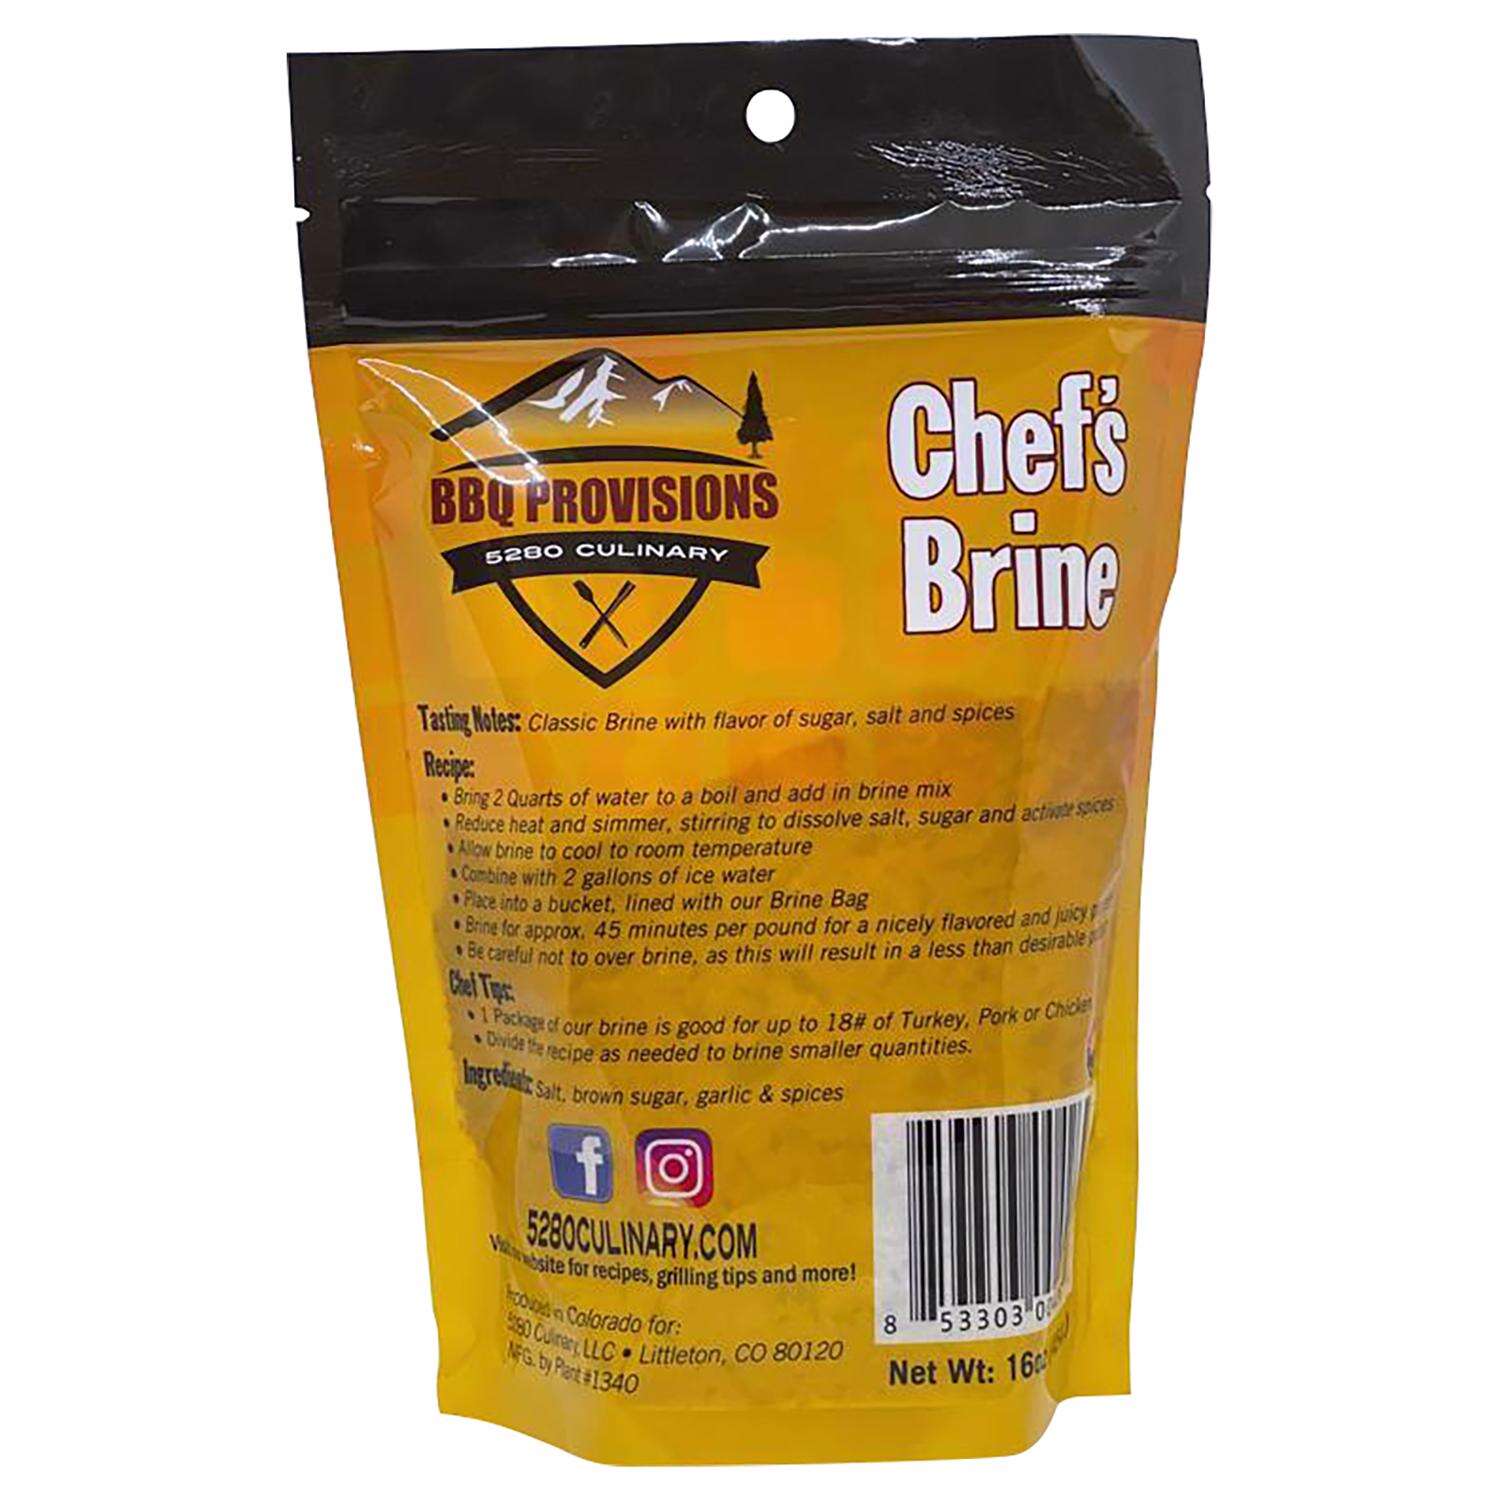 16-Oz 5280 Culinary BBQ Provisions Chefs Brine Mix (Classic or Bayou Cajun) $8.99 + Free Store Pickup at Ace